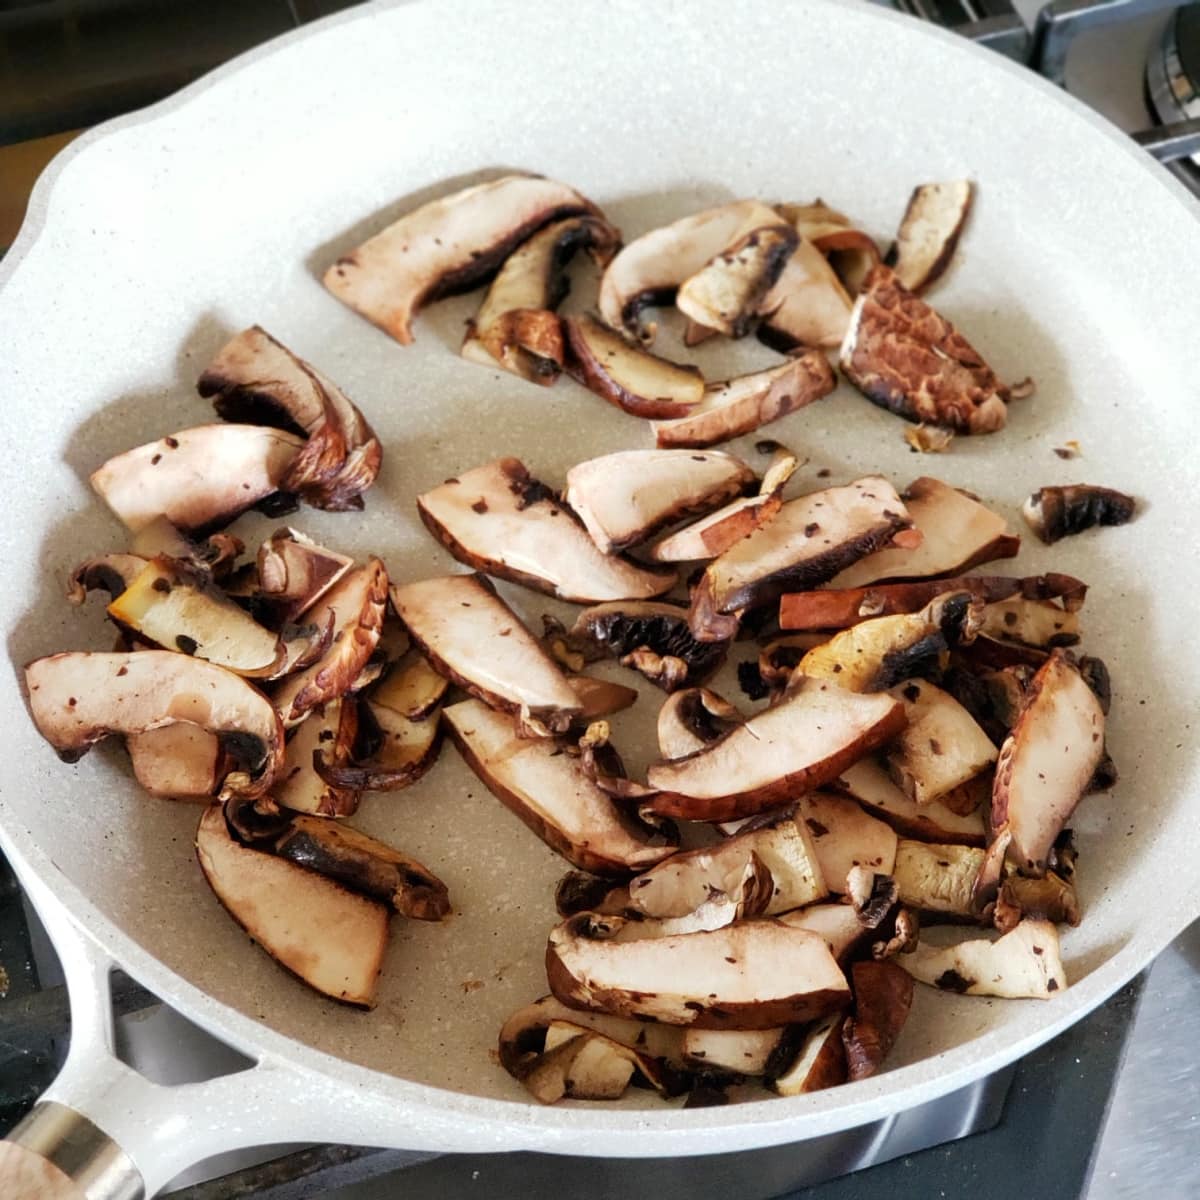 Sliced mushrooms frying in a light-colored skillet